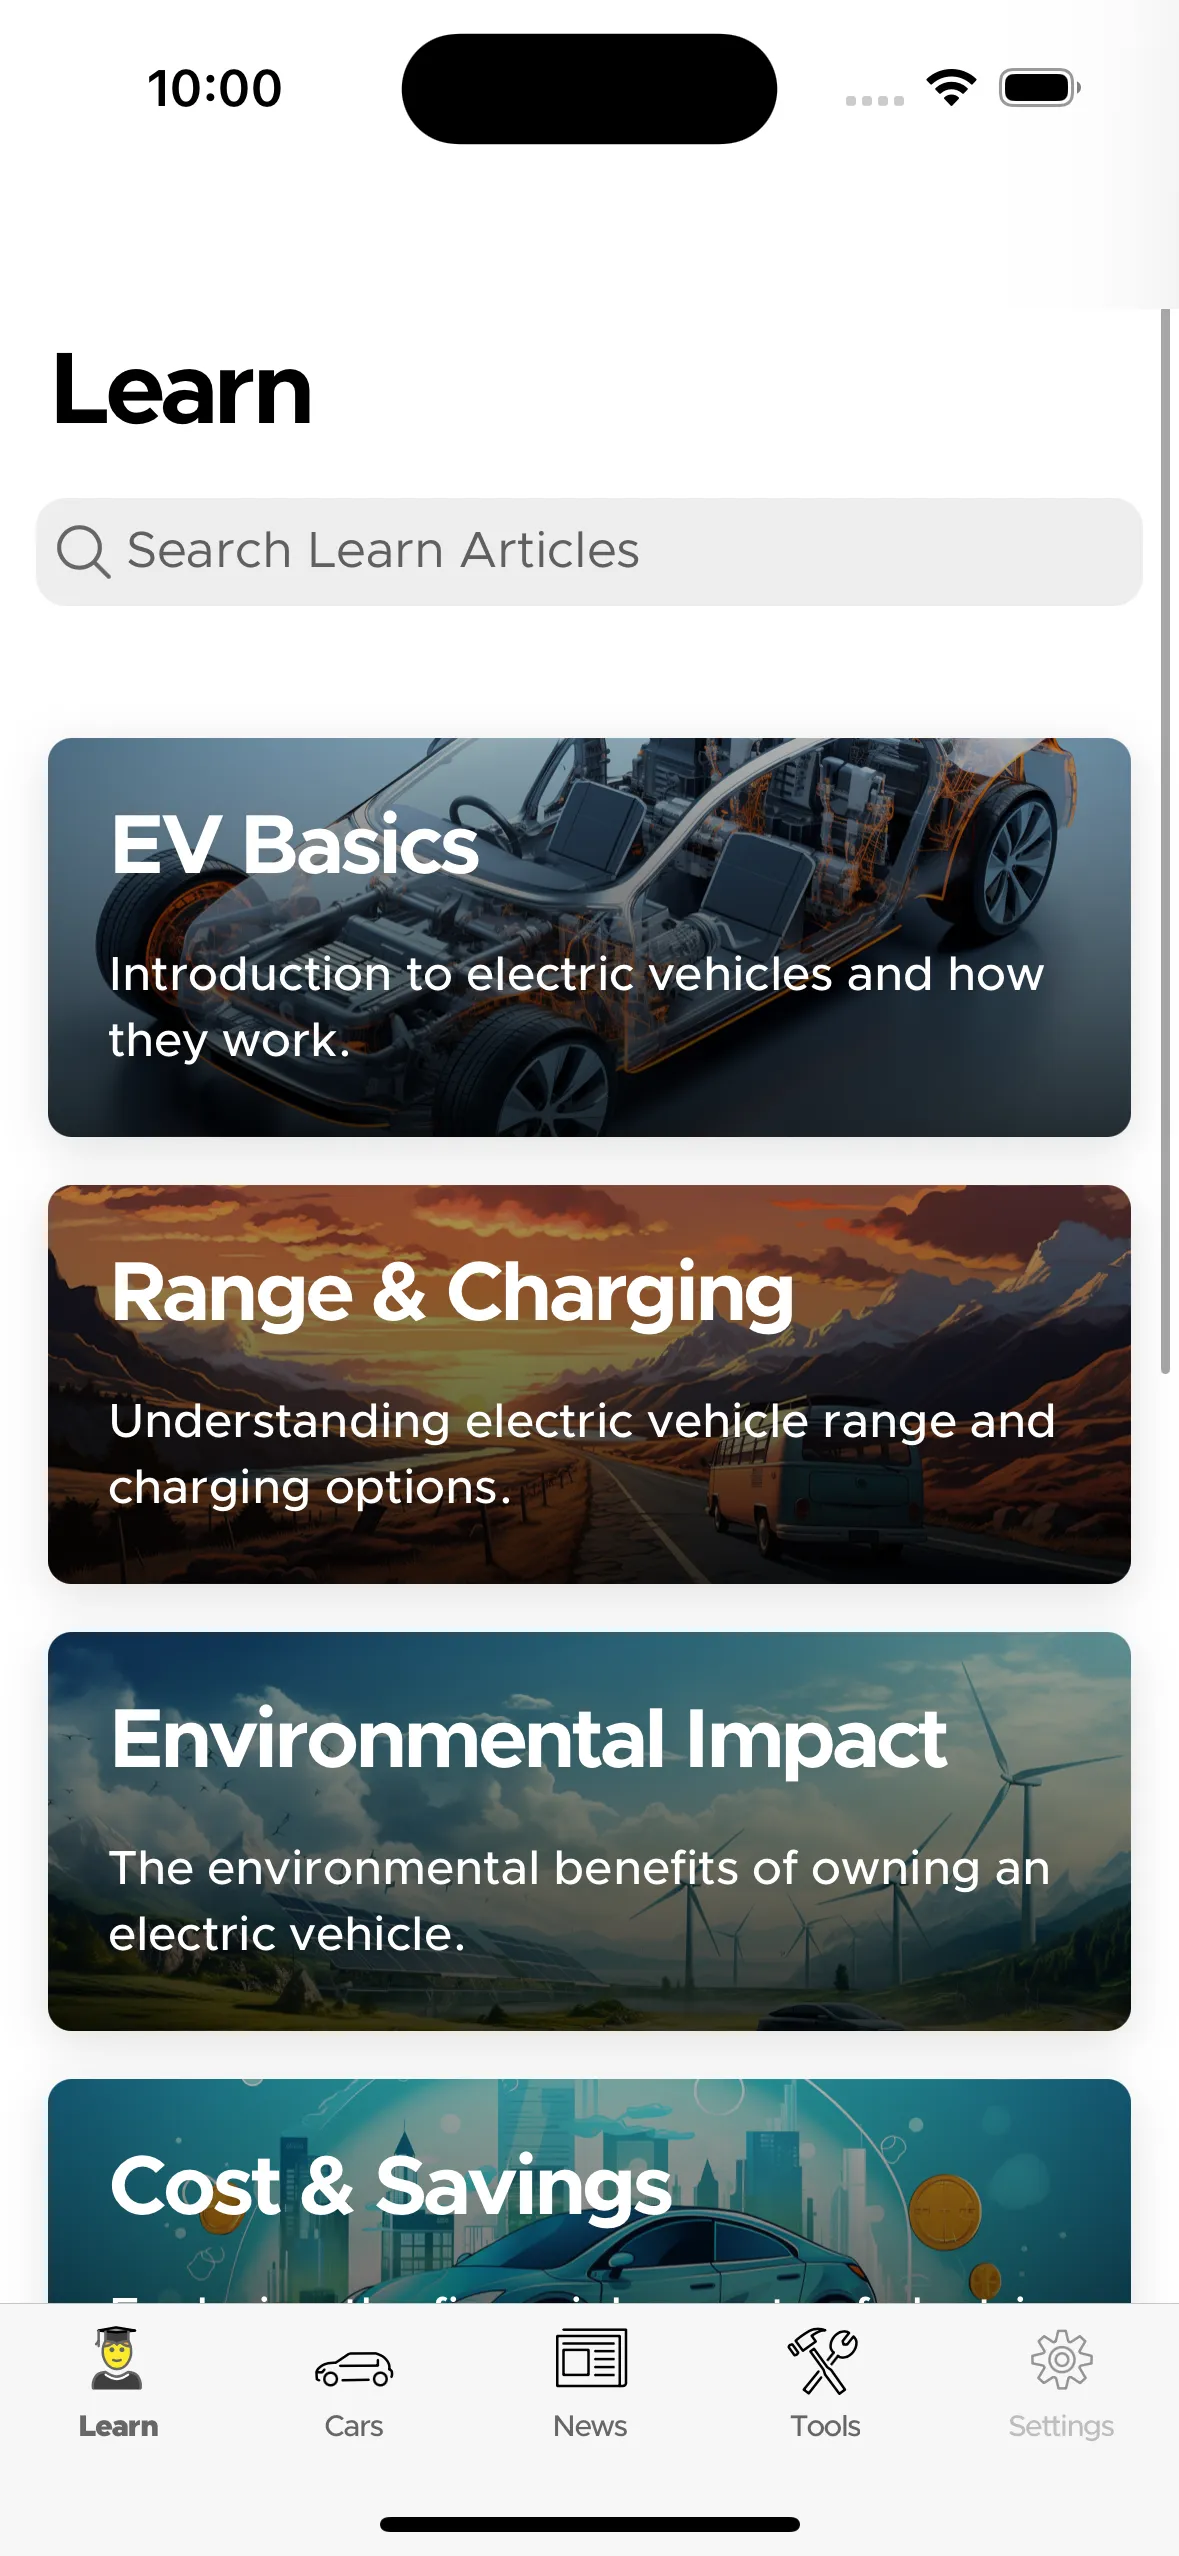 Learn screen of the Hello EV app displaying various educational articles about electric vehicles including topics like 'EV Basics', 'Range & Charging', and 'Environmental Impact.